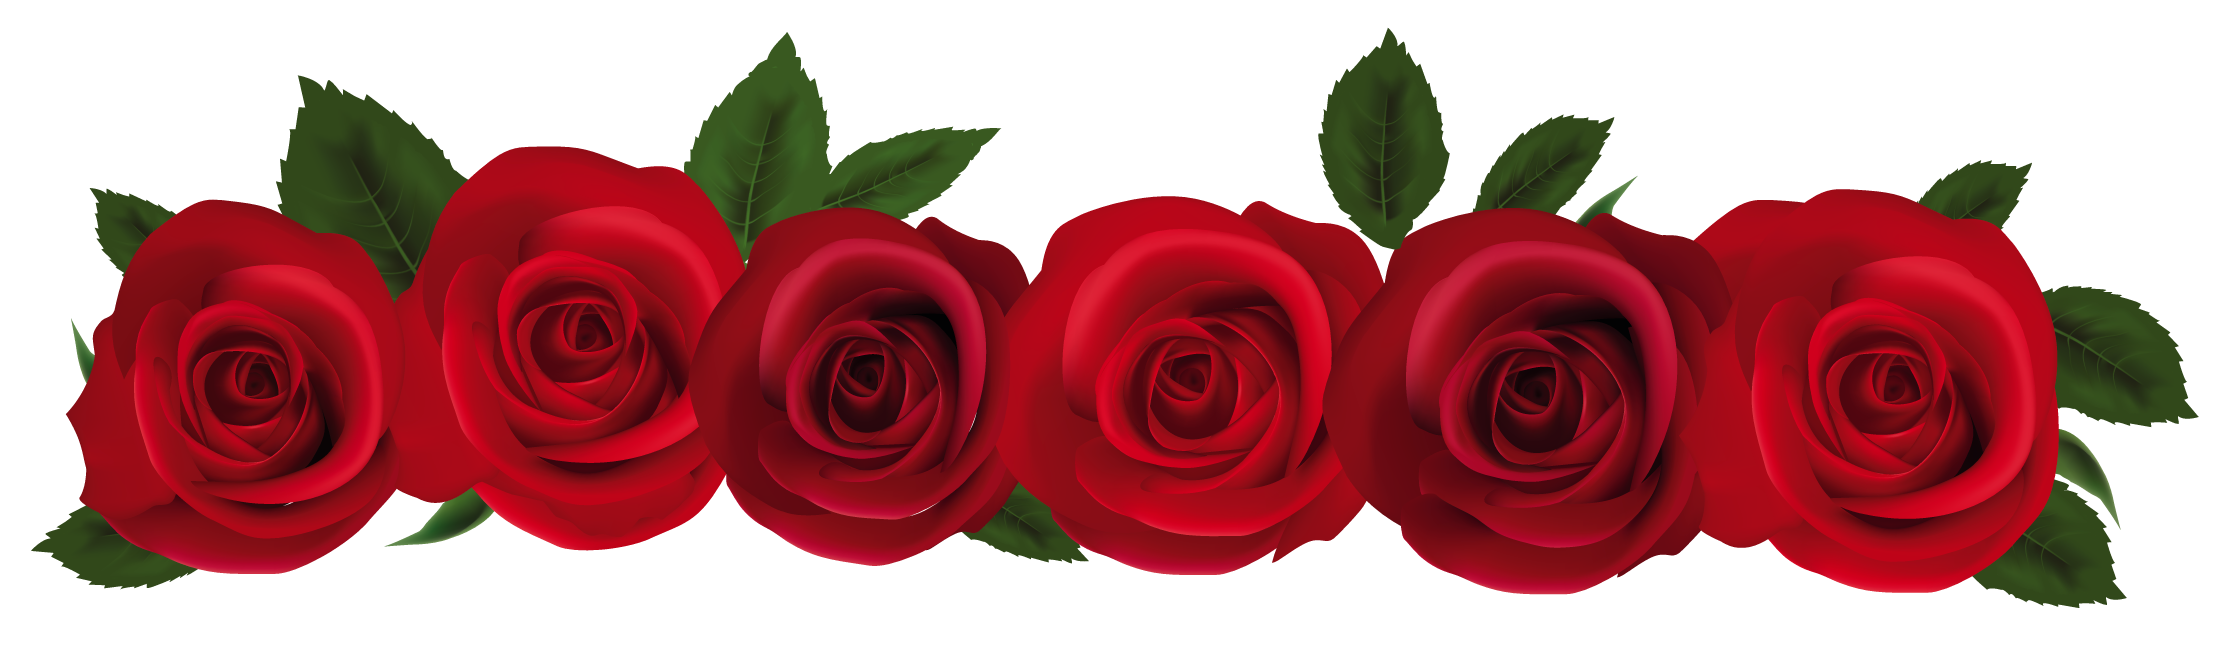 clipart roses red - photo #1